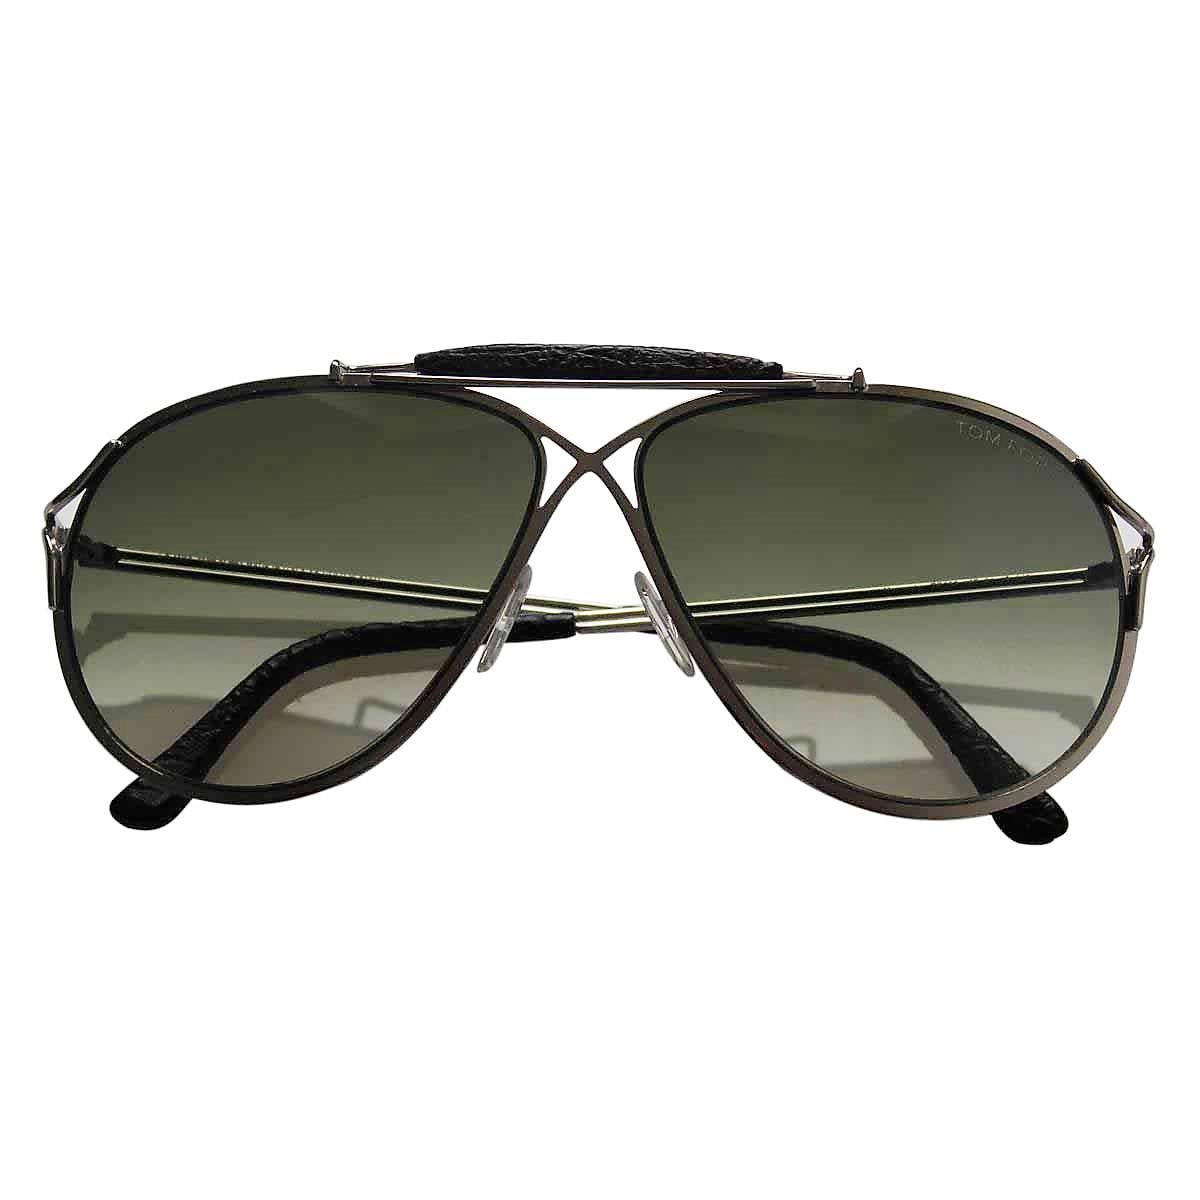 Bran New Tom Ford Alexander Limited Edition White Gold Sunglasses